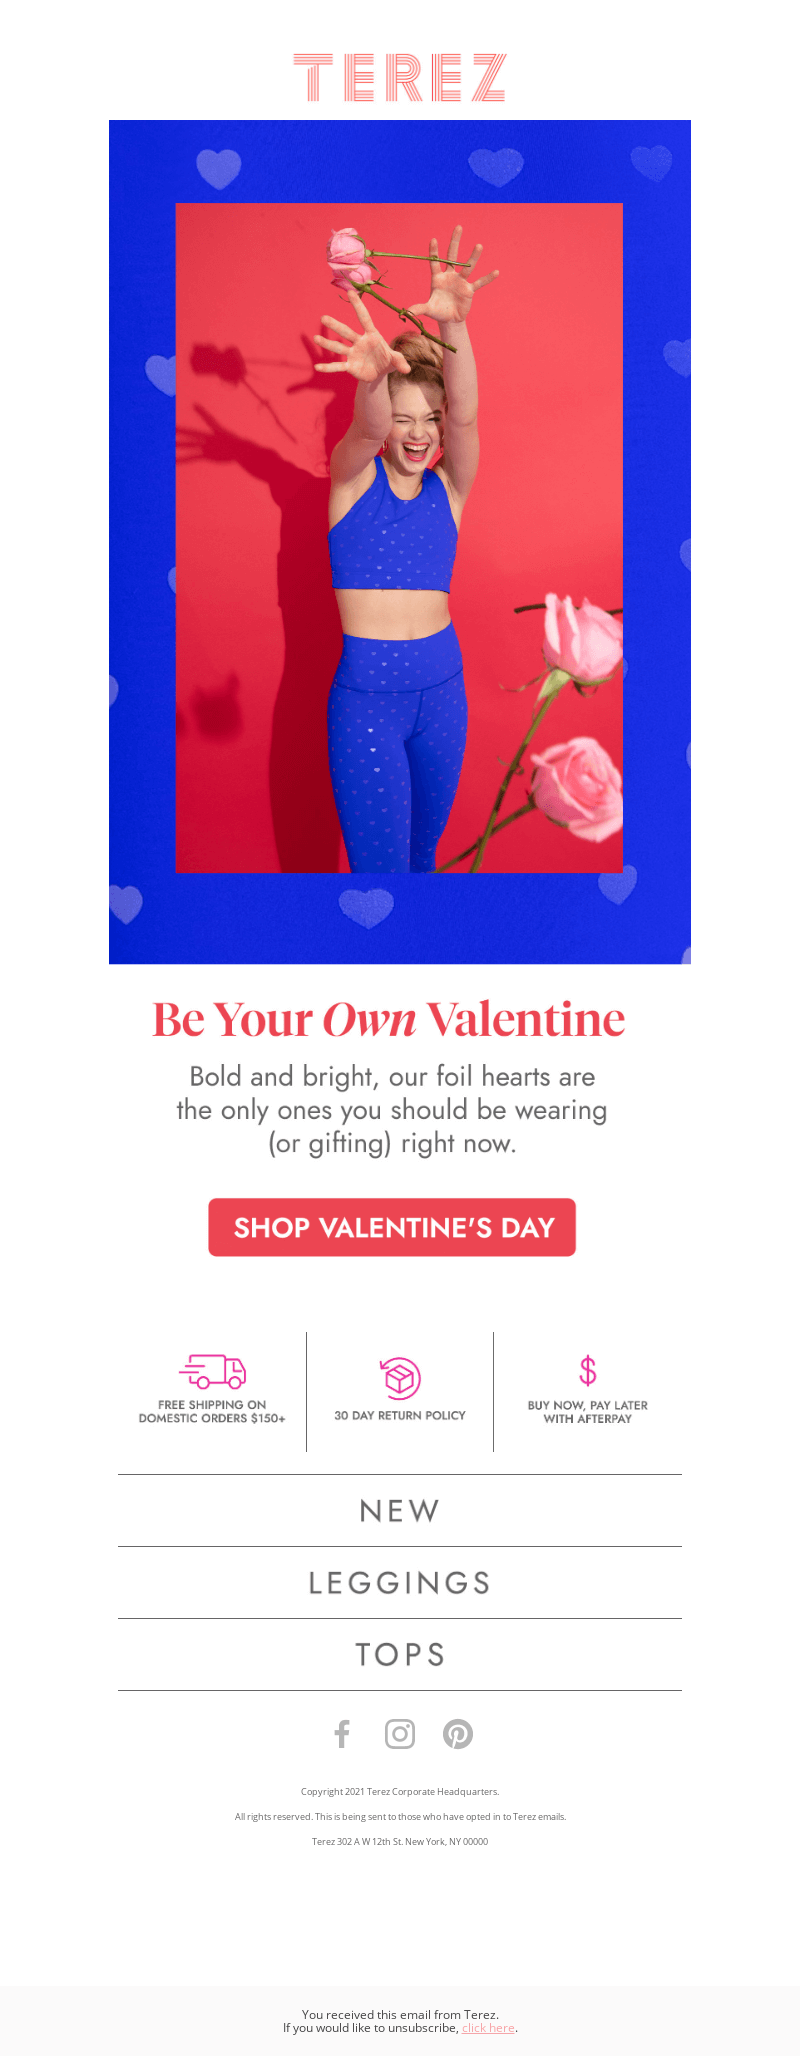 Valentine’s Day email from Terez